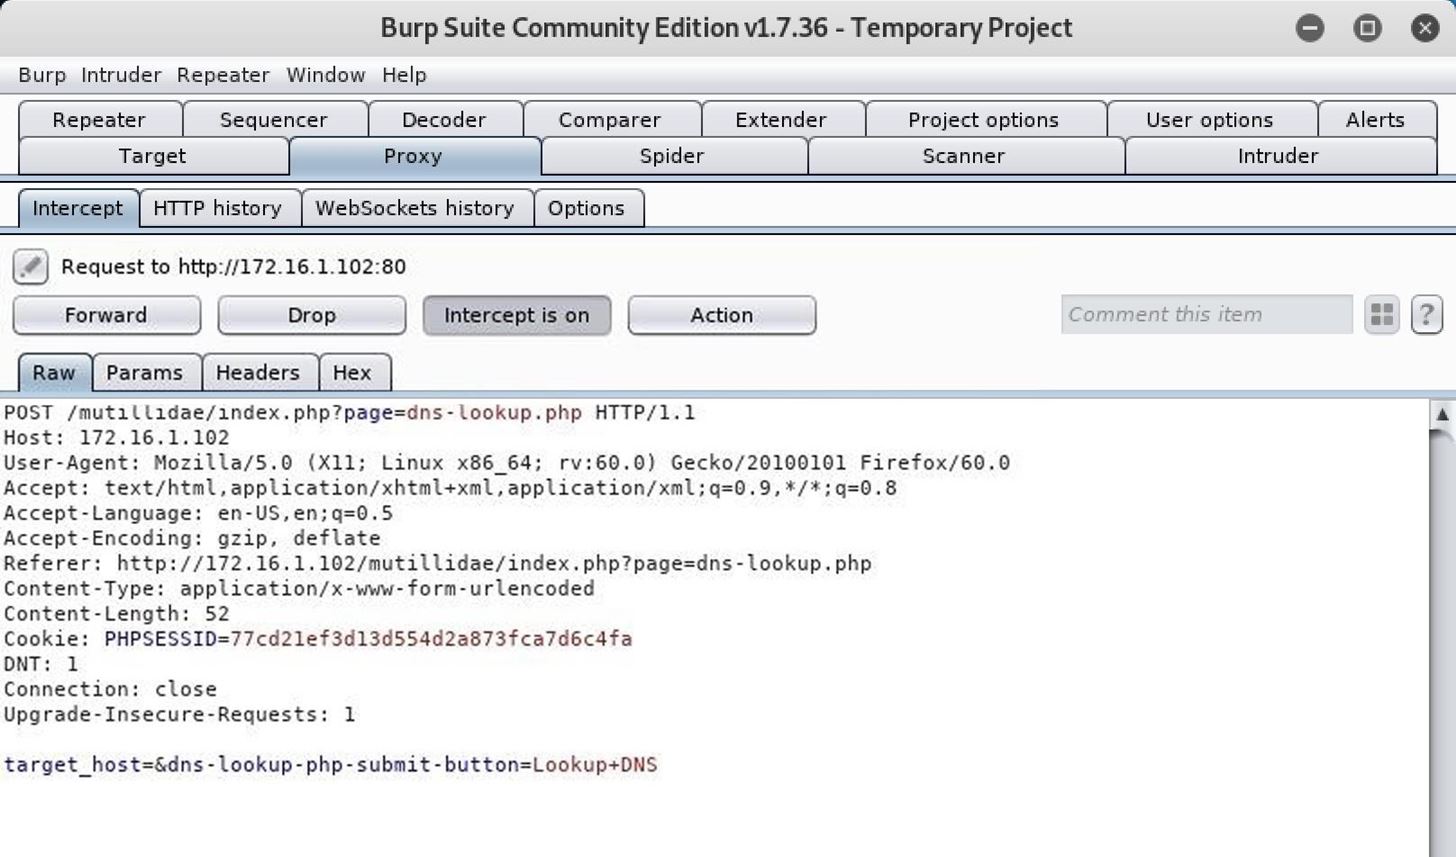 Discover XSS Security Flaws by Fuzzing with Burp Suite, Wfuzz & XSStrike